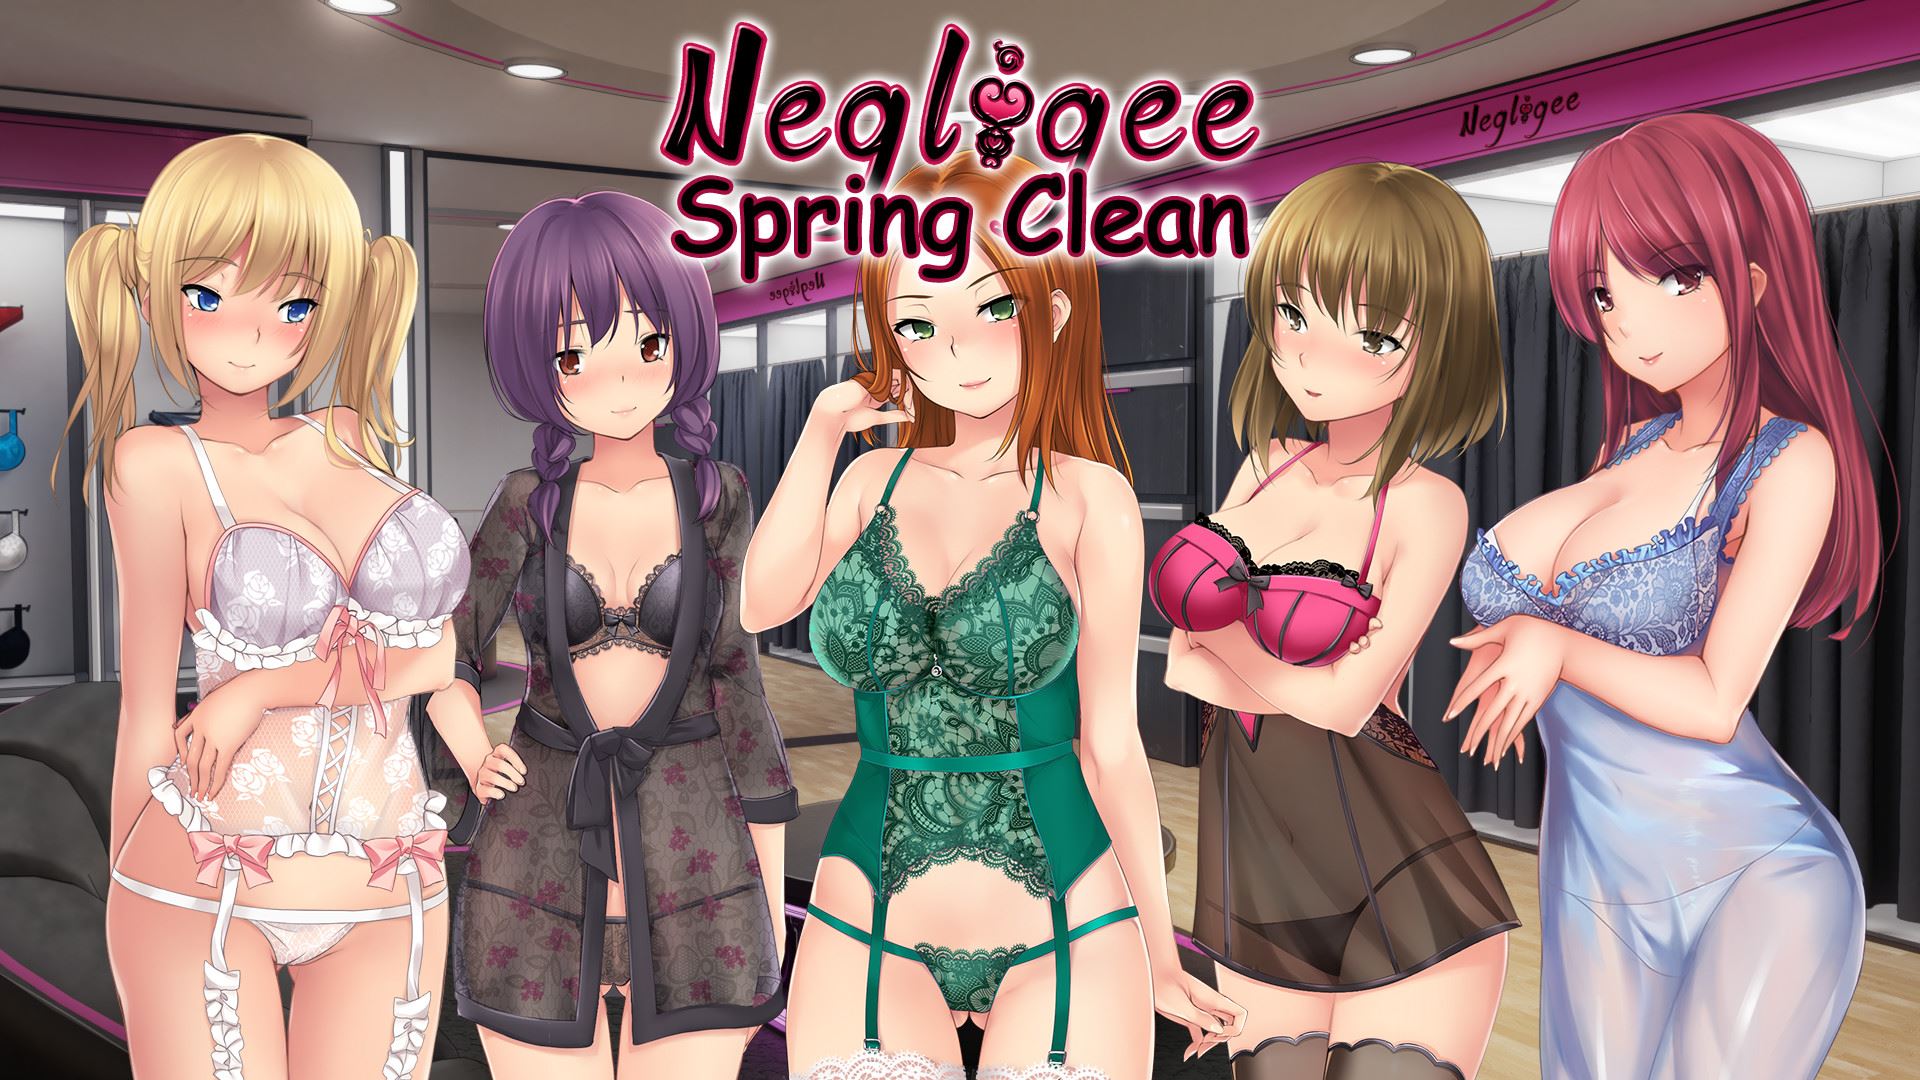 Negligee Visual Novel Porn - Negligee: Spring Clean Prelude Ren'py Porn Sex Game v.1.0 Download for  Windows